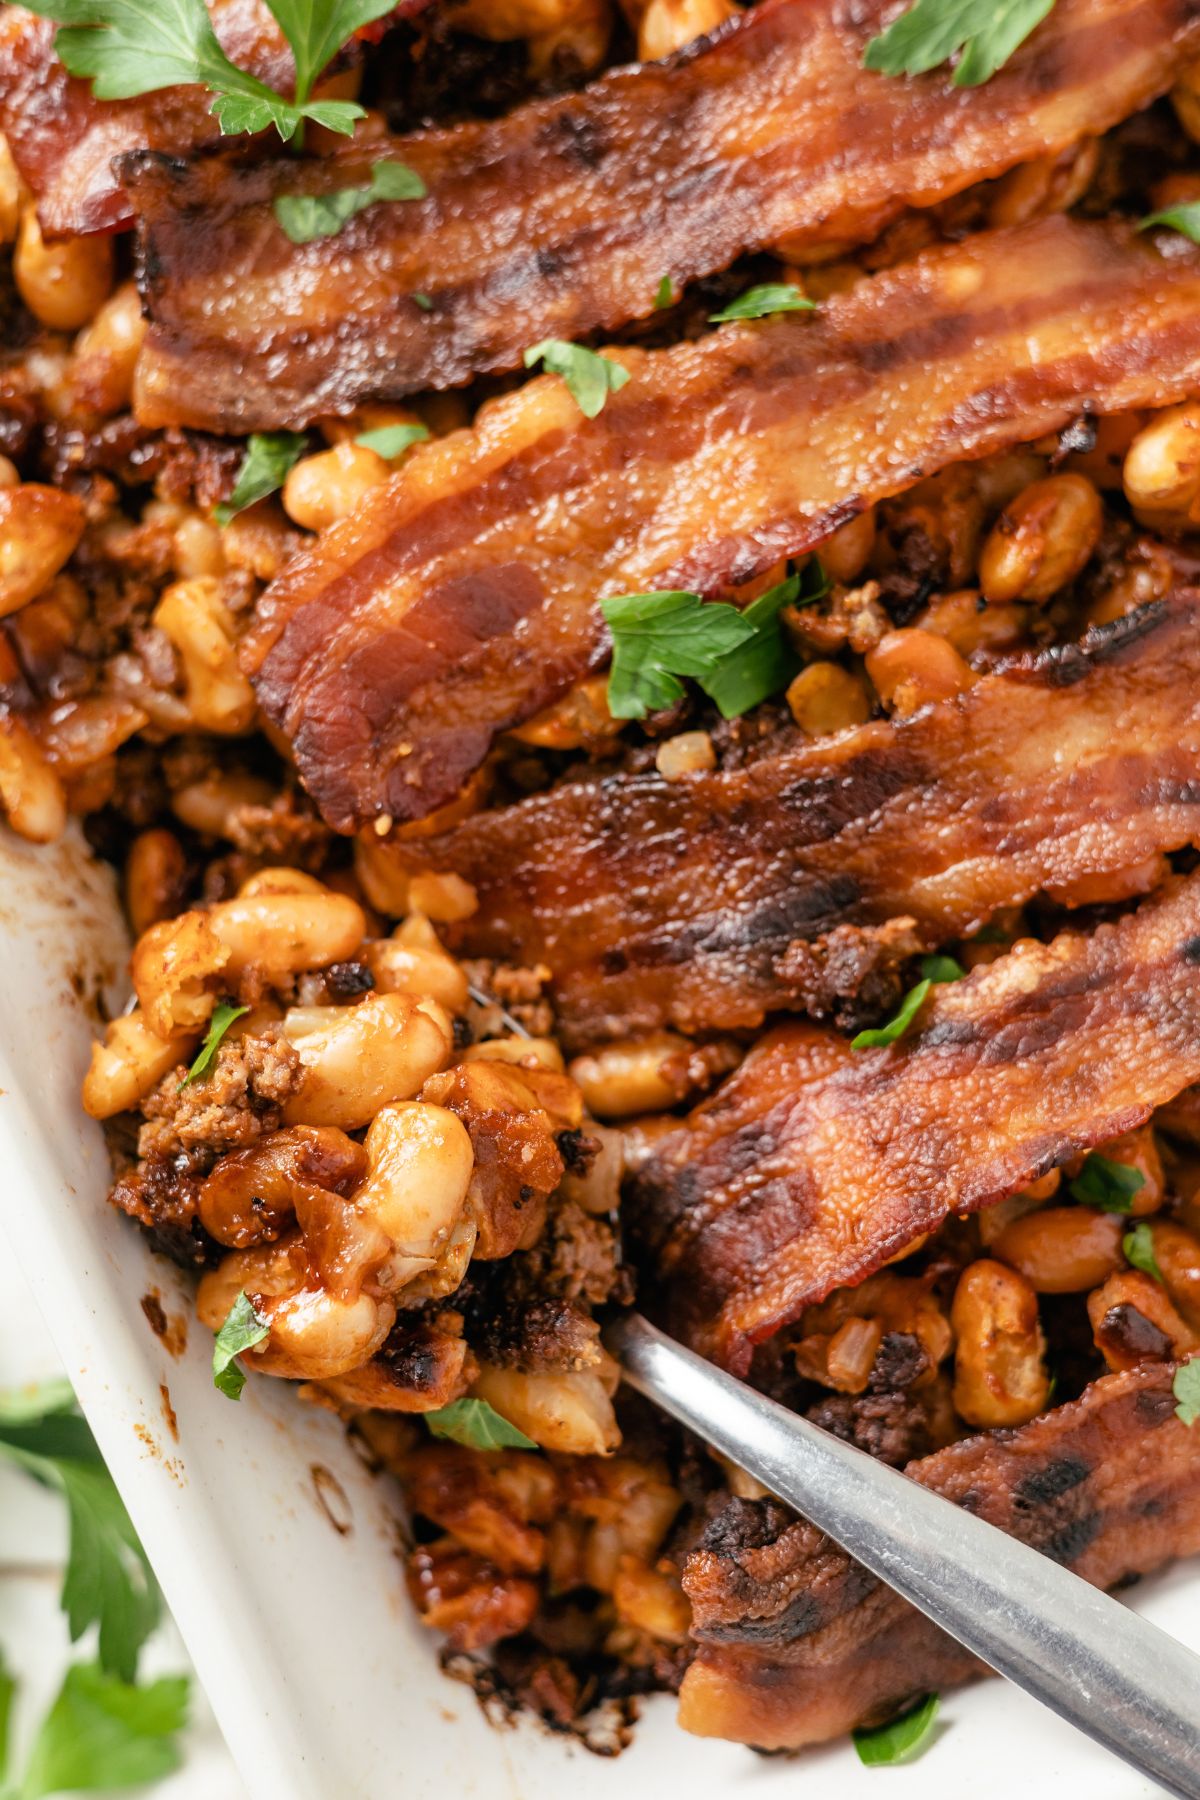 Savory baked beans with ground beef, topped with crispy bacon perfection.